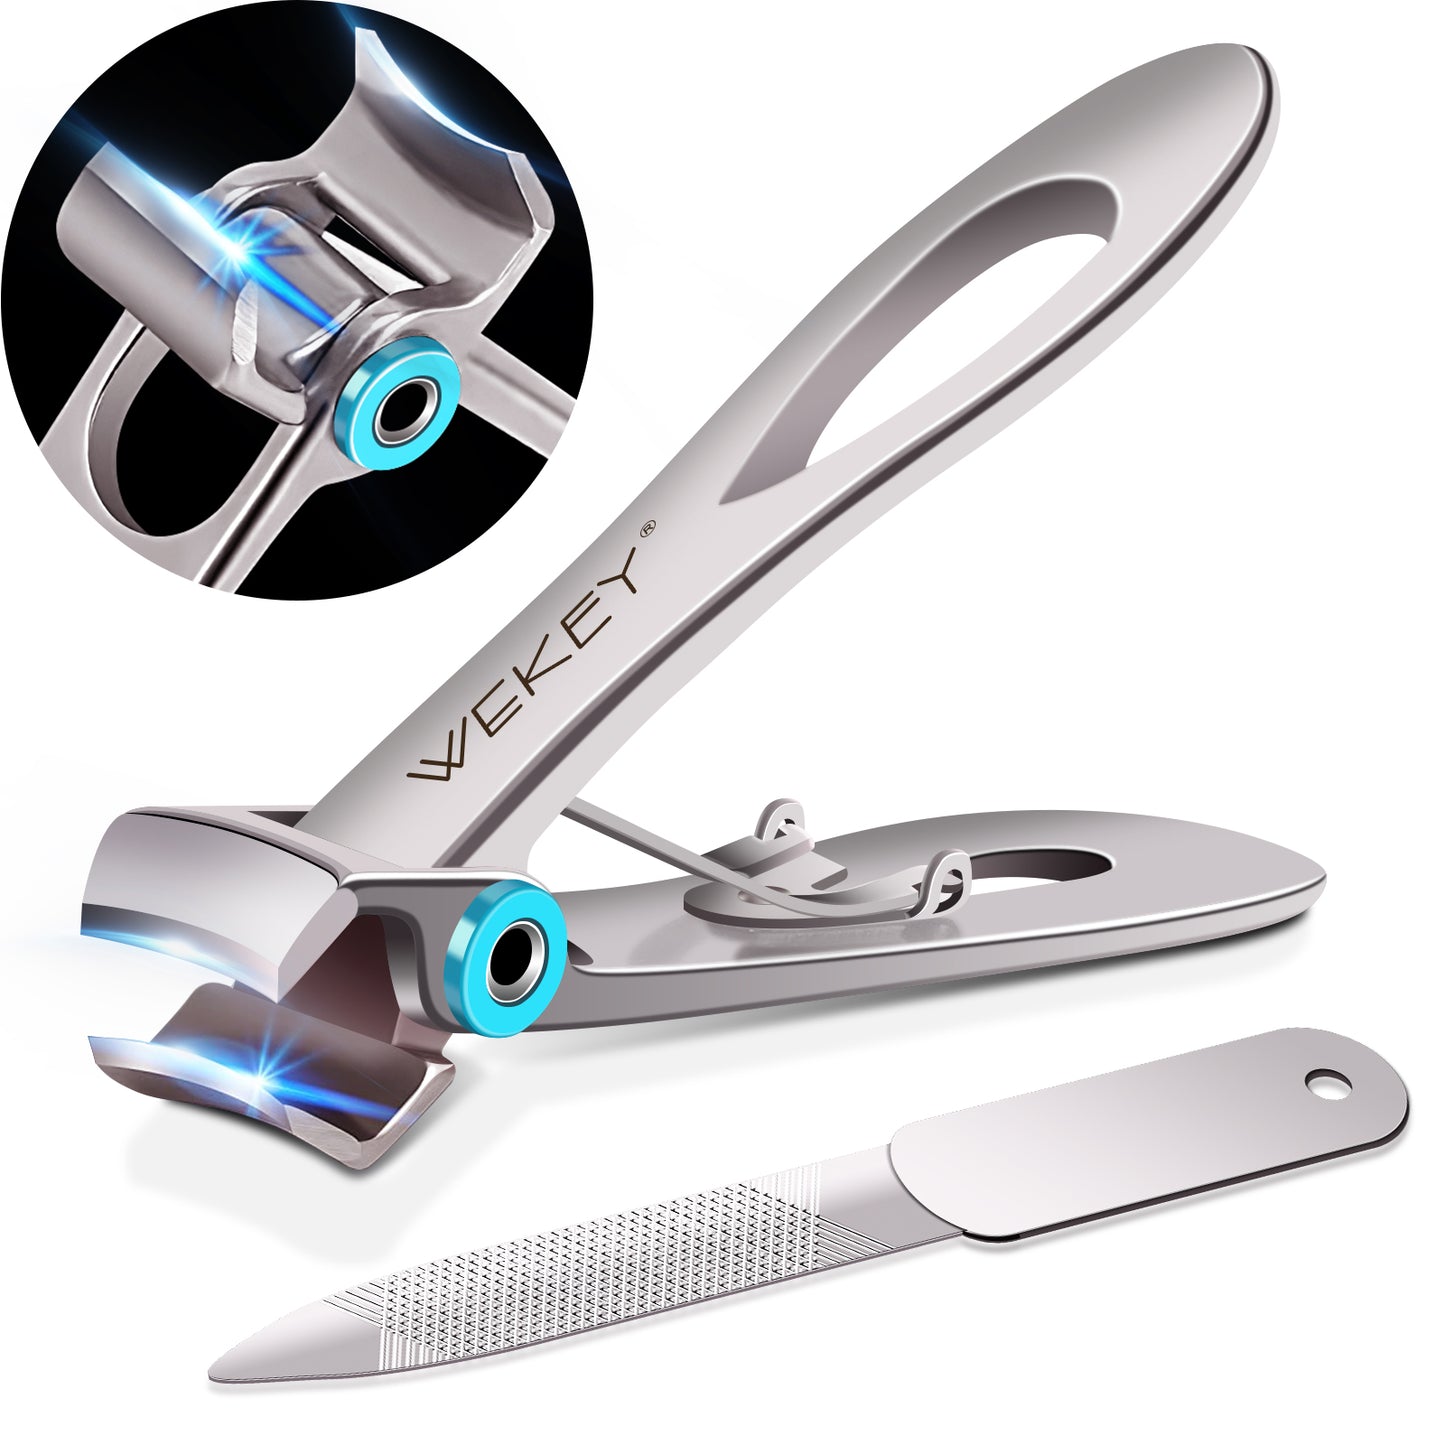 Toenail Clippers for Thick Nails, Large Nail Clippers Adult Senior